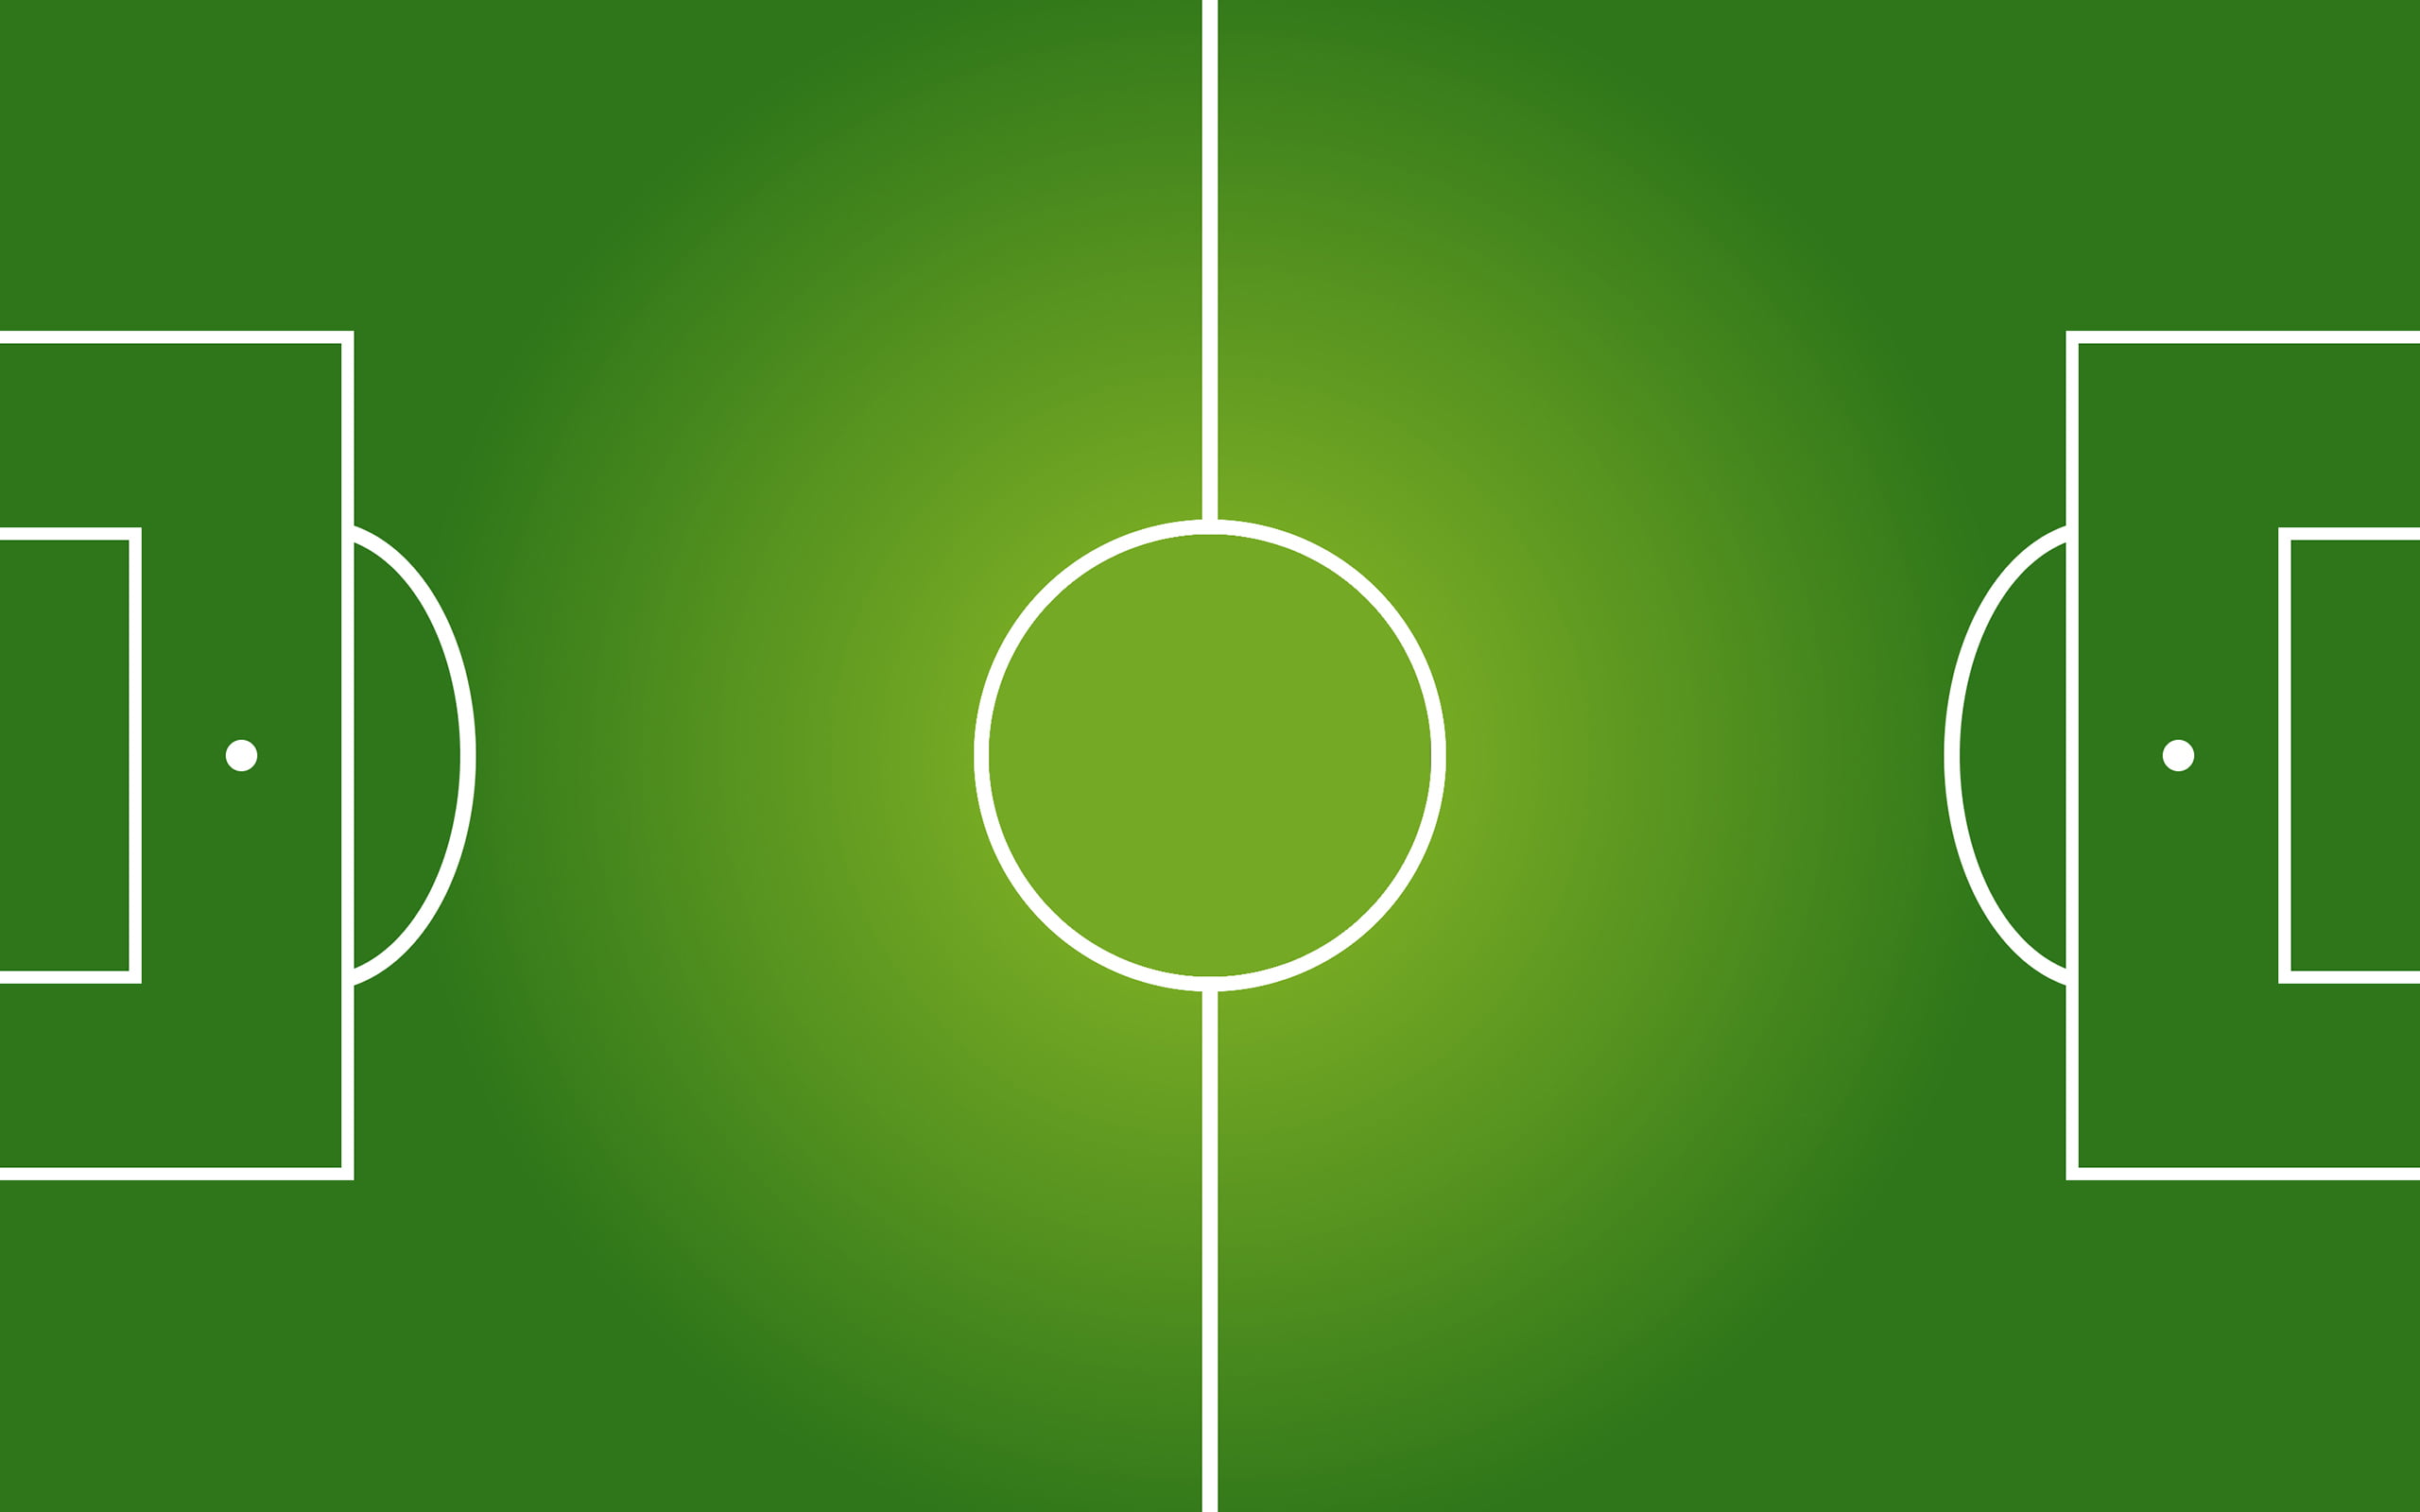 soccer field illustration, soccer pitches, sports, minimalism, gradient